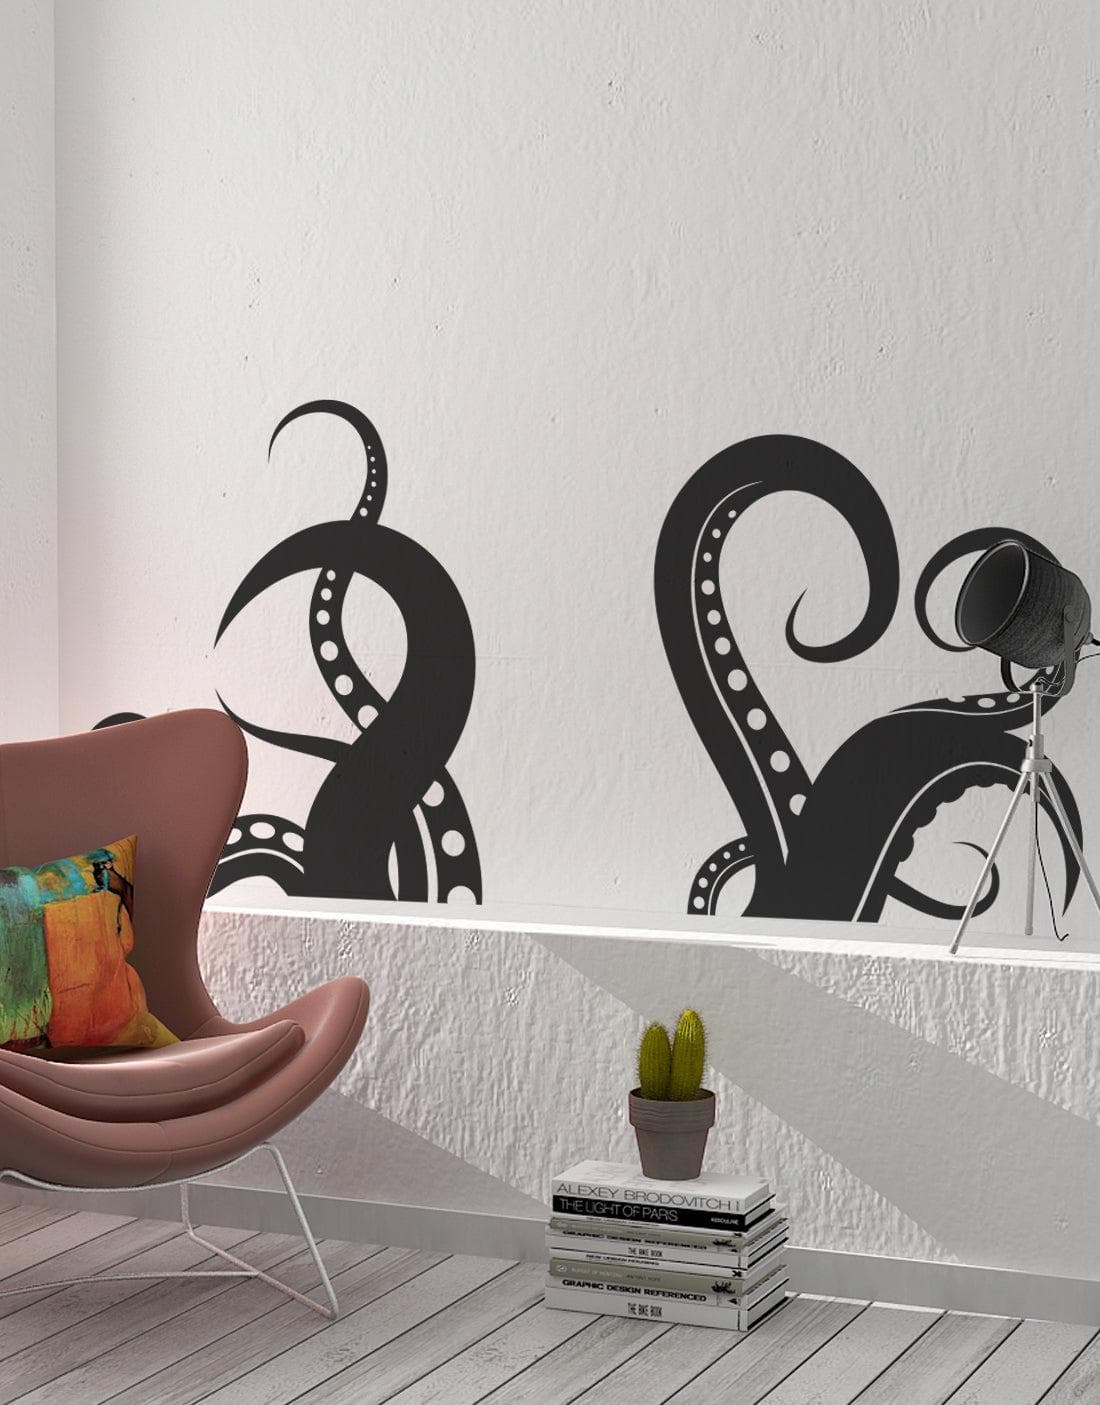 A black octopus tentacles decal on a white wall near an armchair, lamp, and pile of white books with a potted cactus.